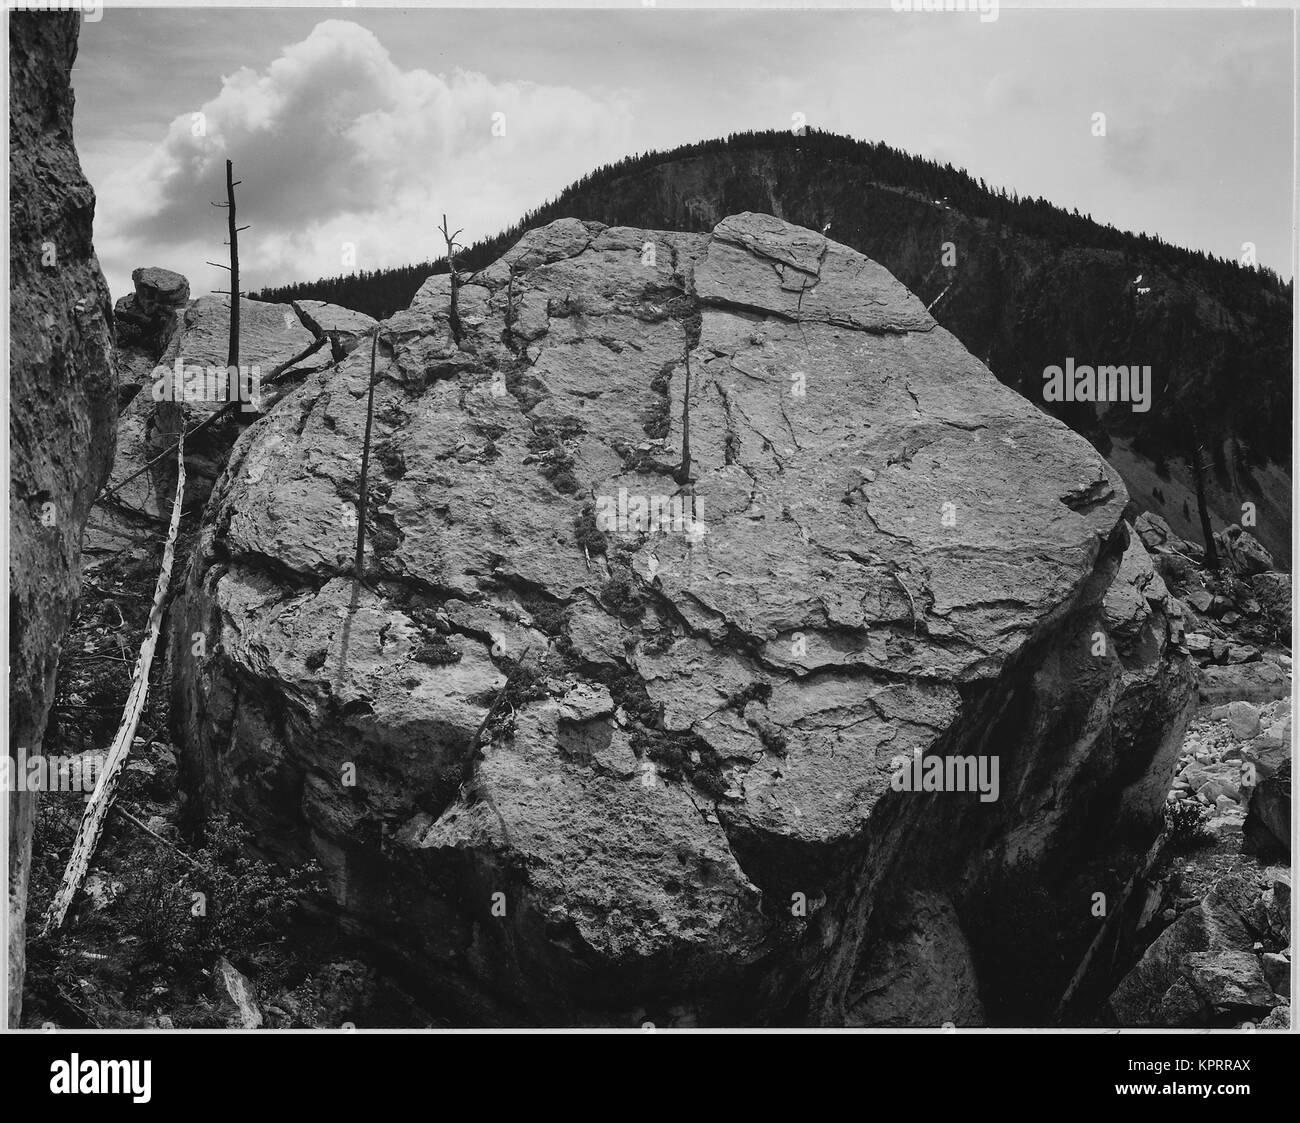 Boulder with hill in background 'Rocks at Silver Gate Yellowstone National Park' Wyoming, Geology, Geological. 1933 - 1942 Stock Photo